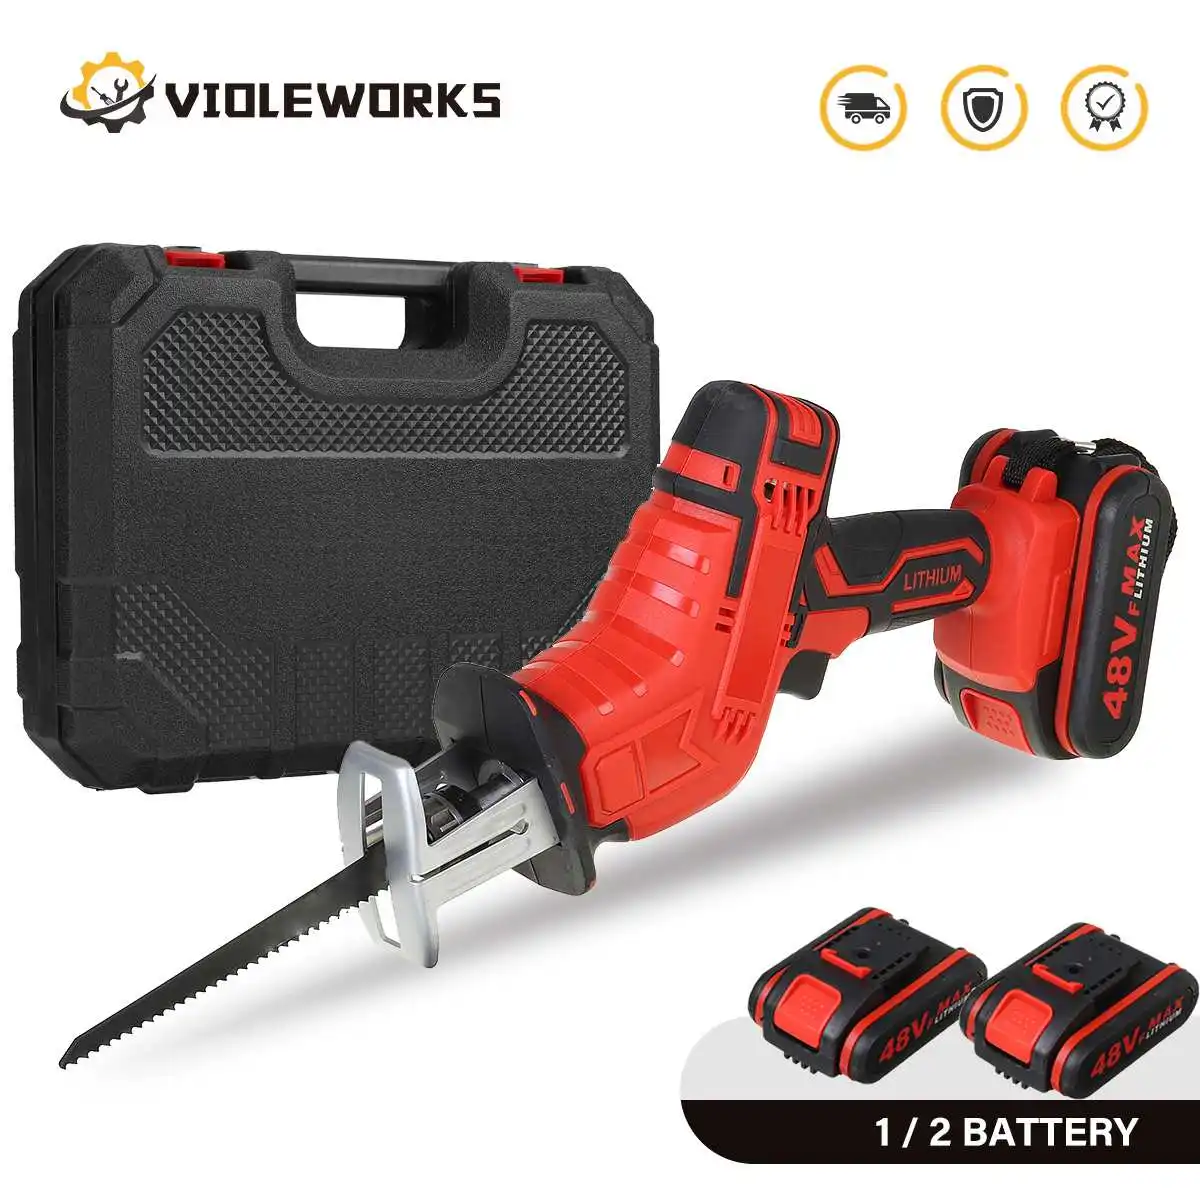 

3000W 88VF Cordless Reciprocating Saw 4 Blades Rechargeable Electric Saw Metal Cutting Woodworking Tool Kit with Li-ion Battery